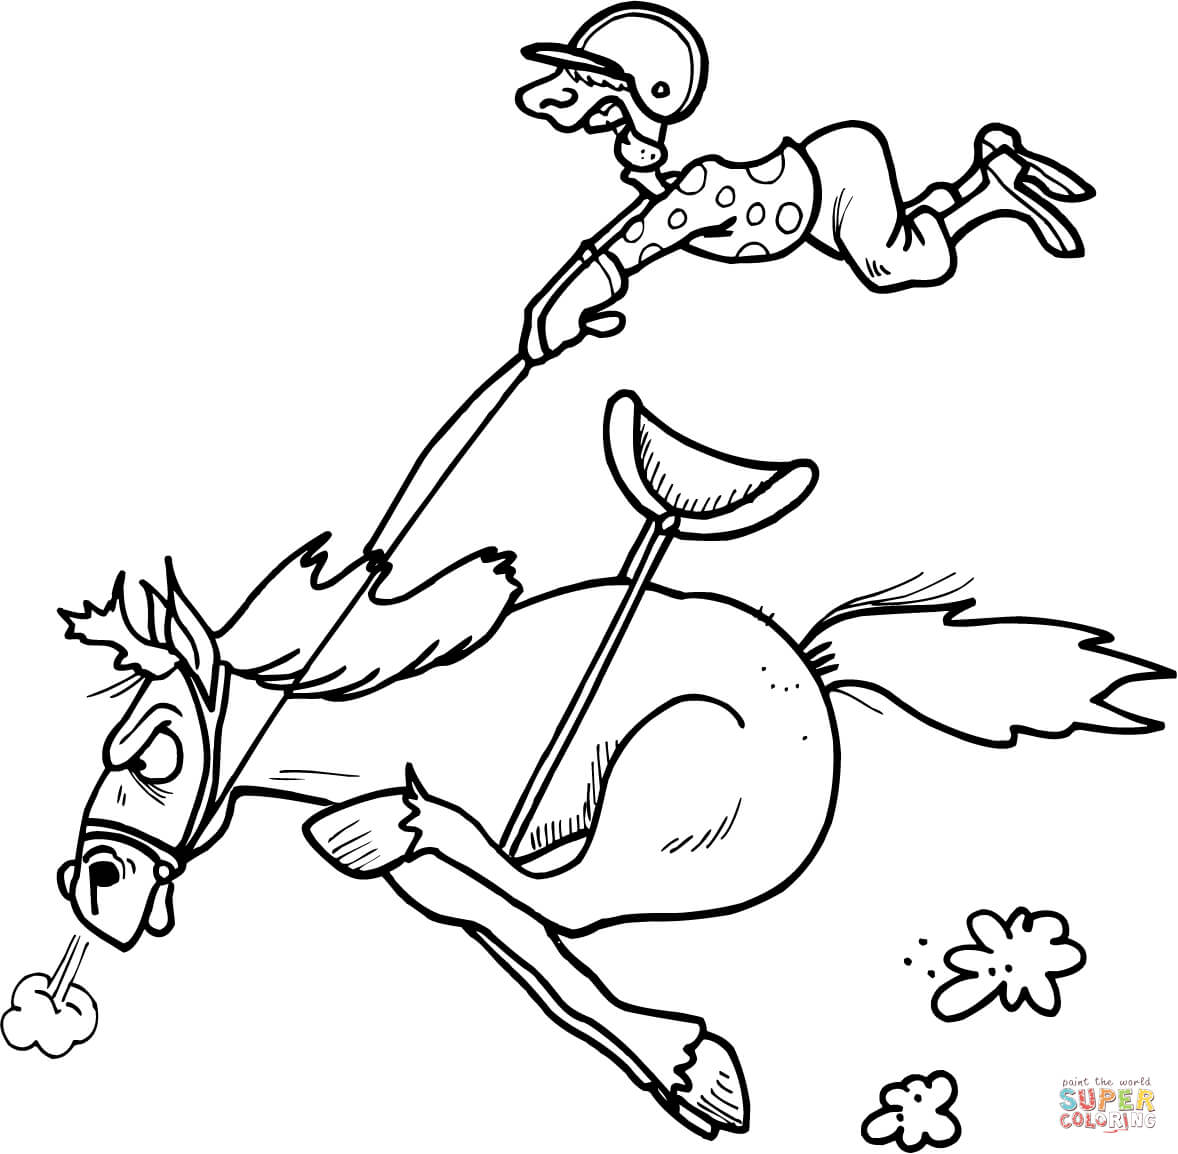 Jockey in a Horse Racing Competition coloring page | Free ...